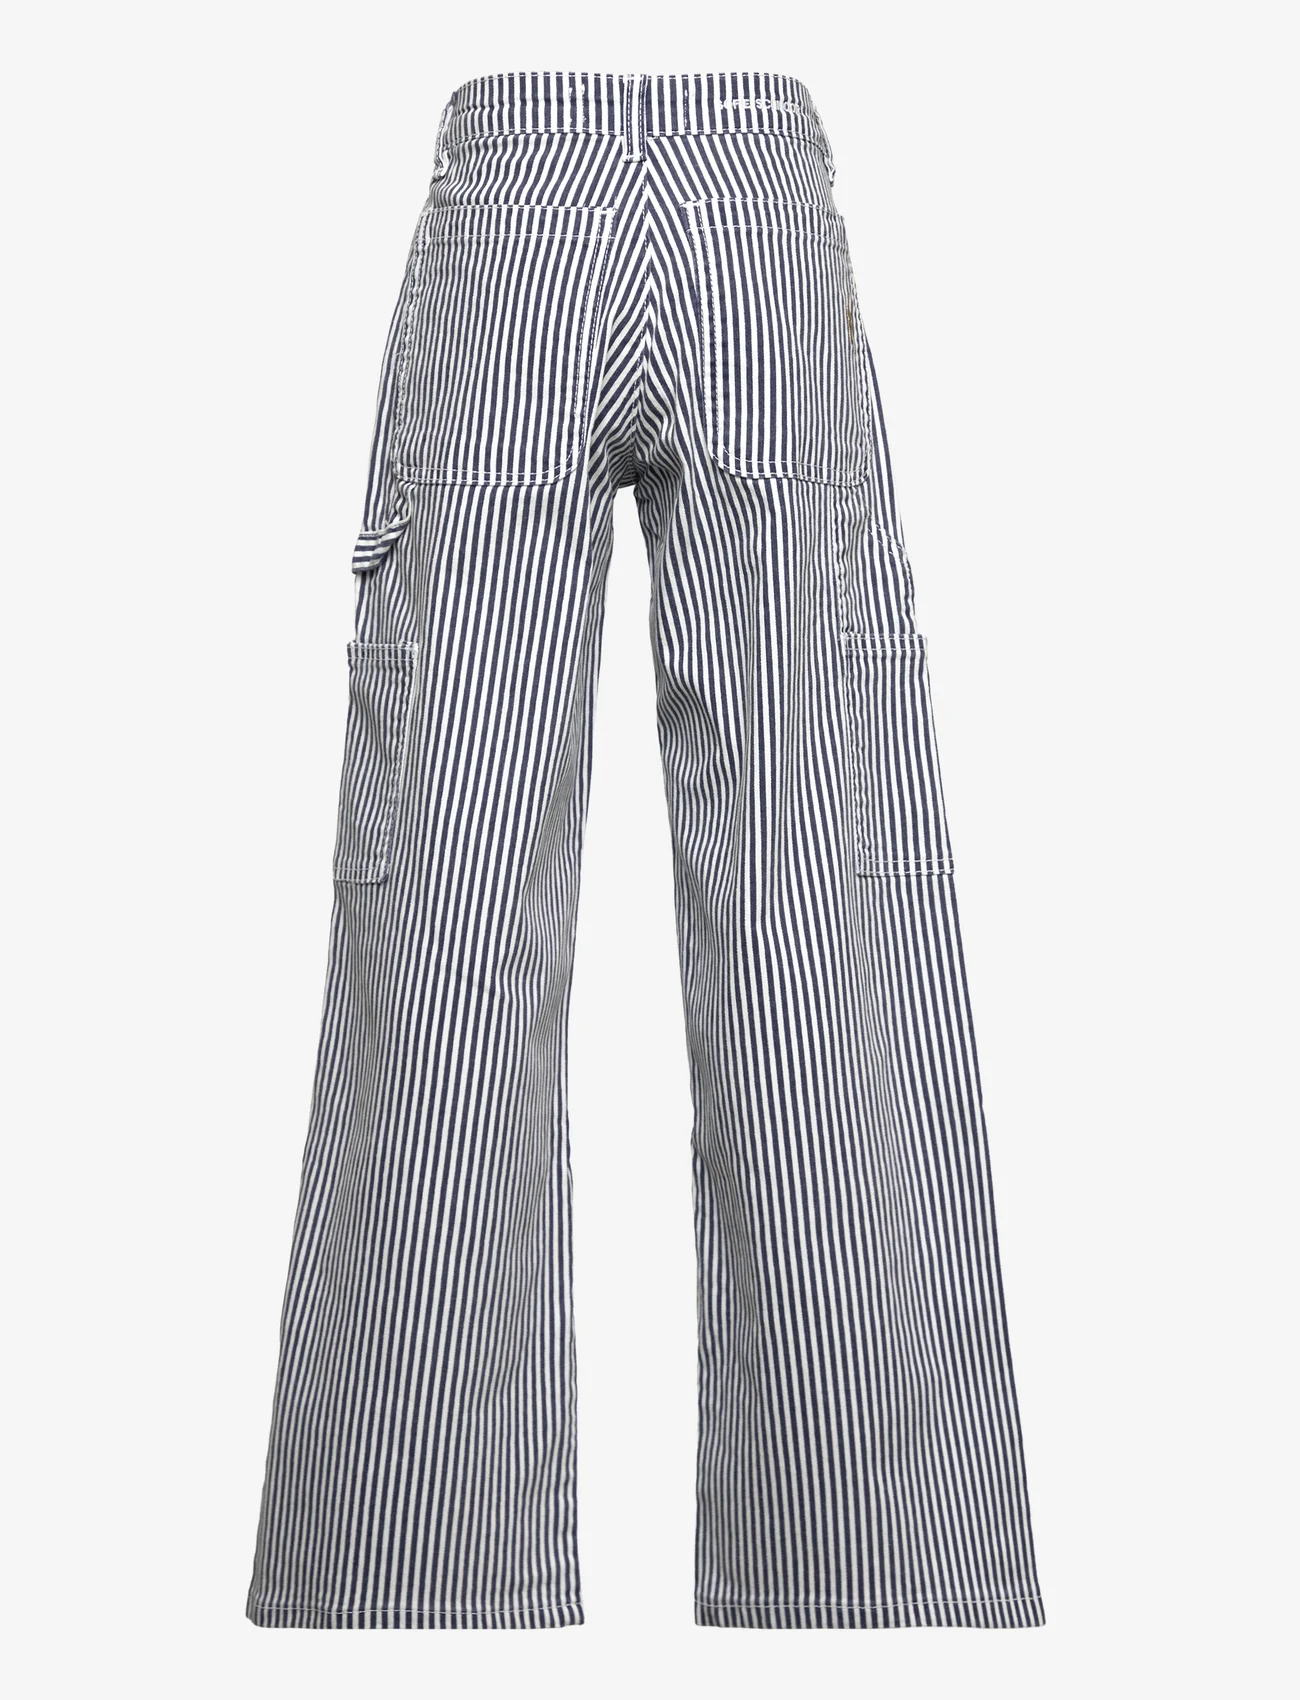 Sofie Schnoor Young - Pants - pantalons - dark blue striped - 1